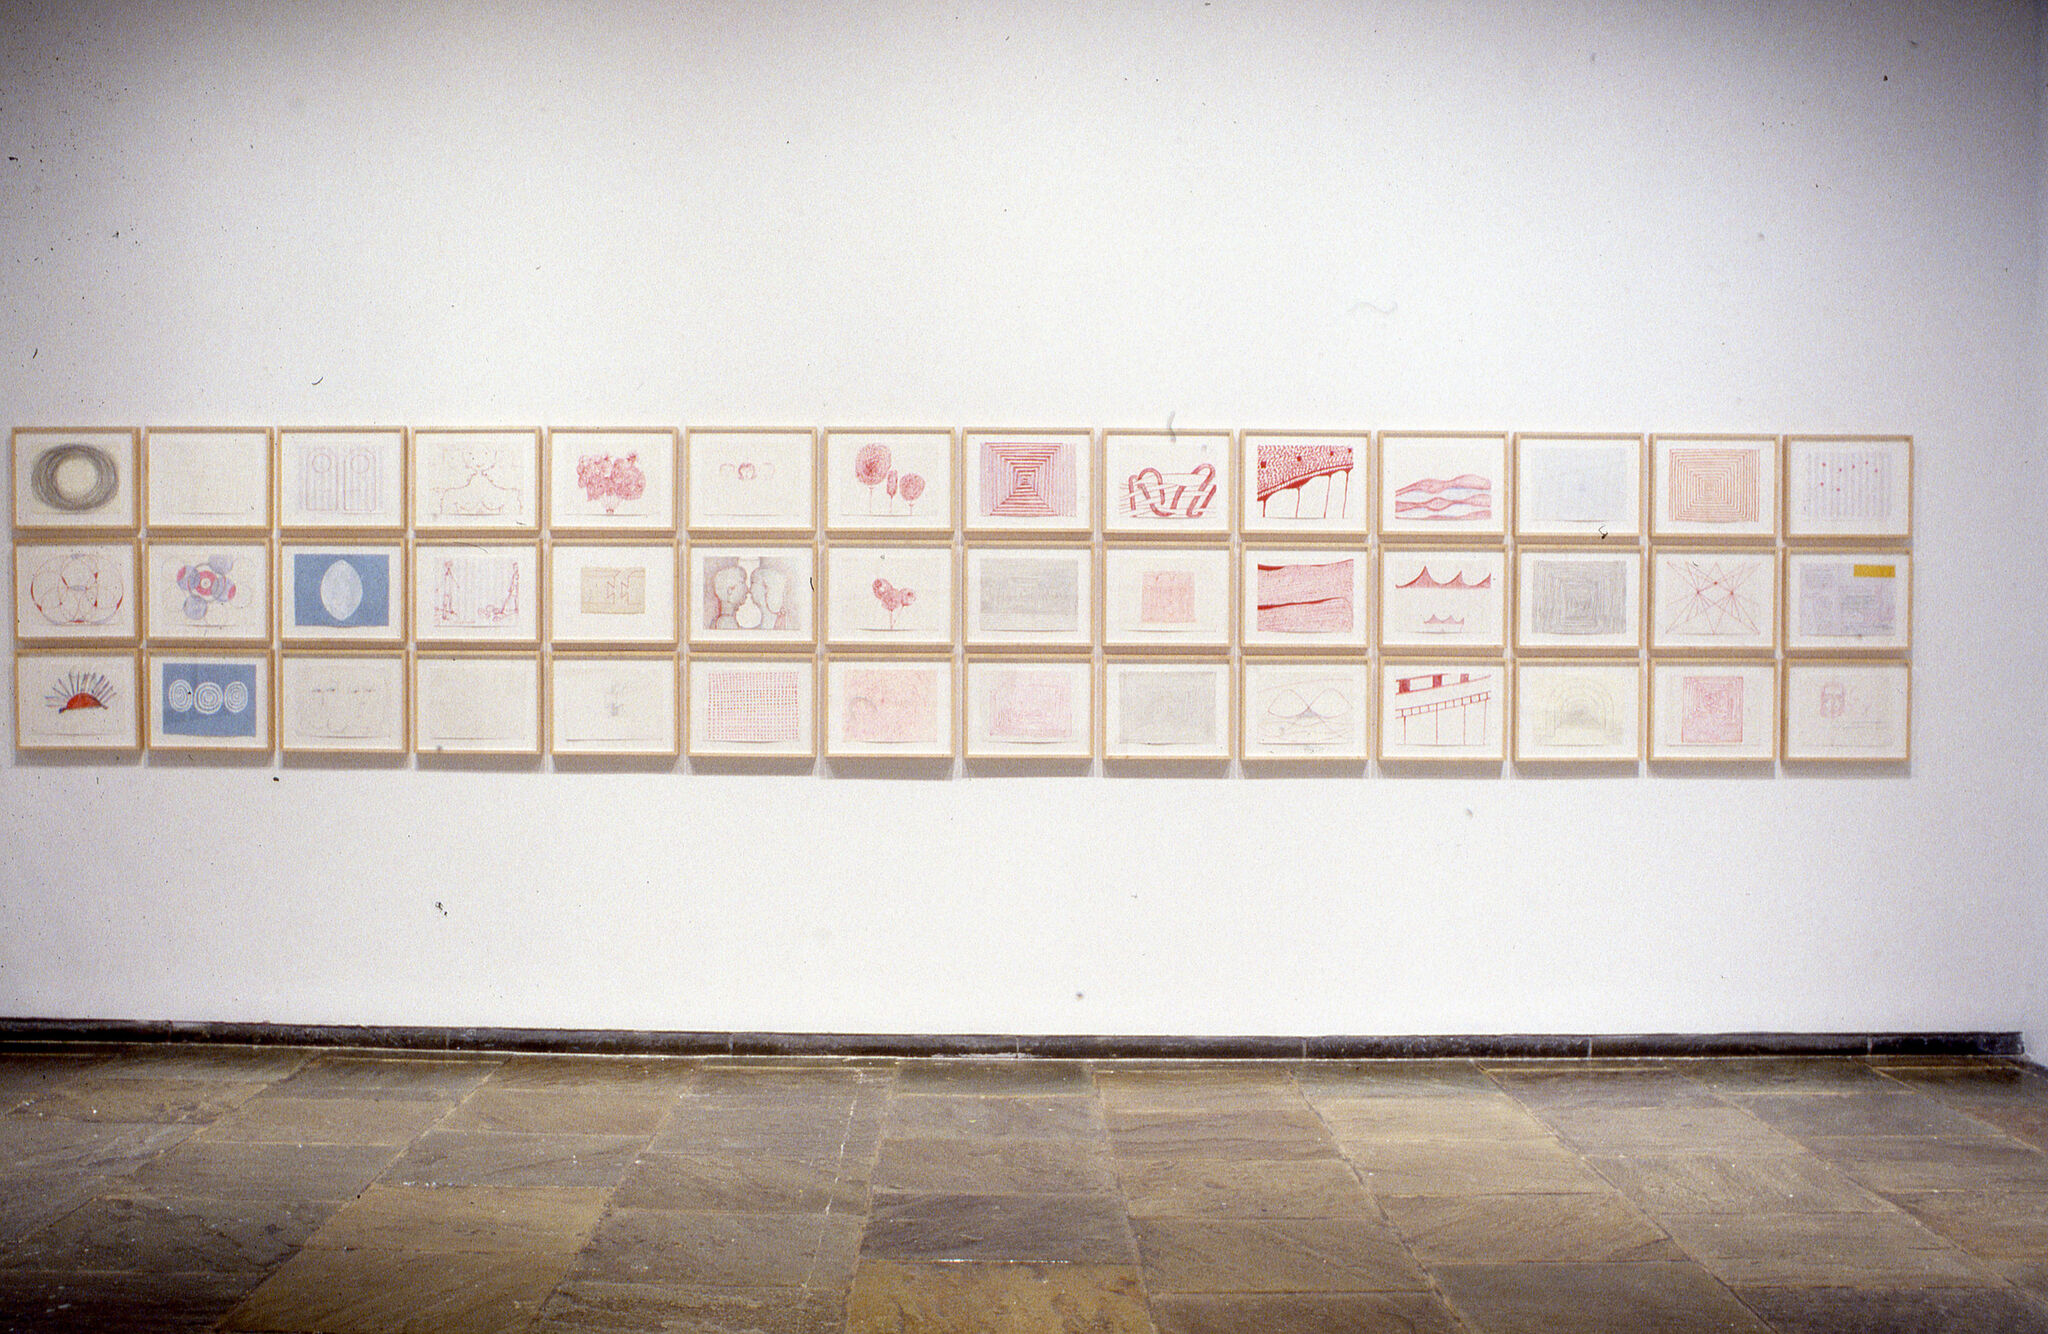 Three rows of drawings displayed in frames hung on a wall.